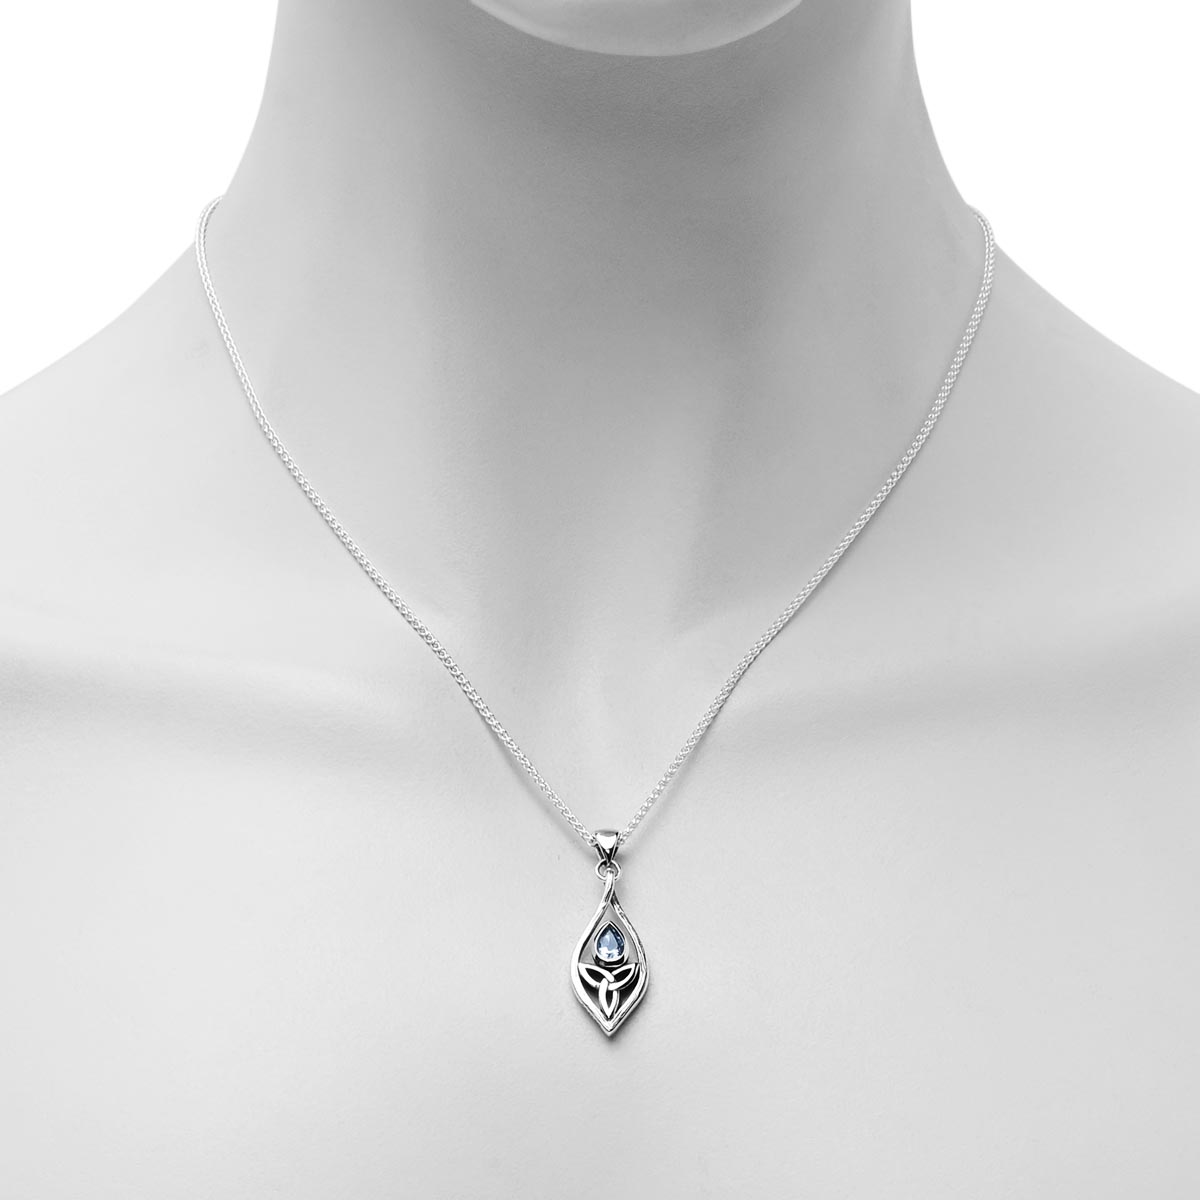 Keith Jack Blue Topaz Guardian Angel Necklace in Sterling Silver